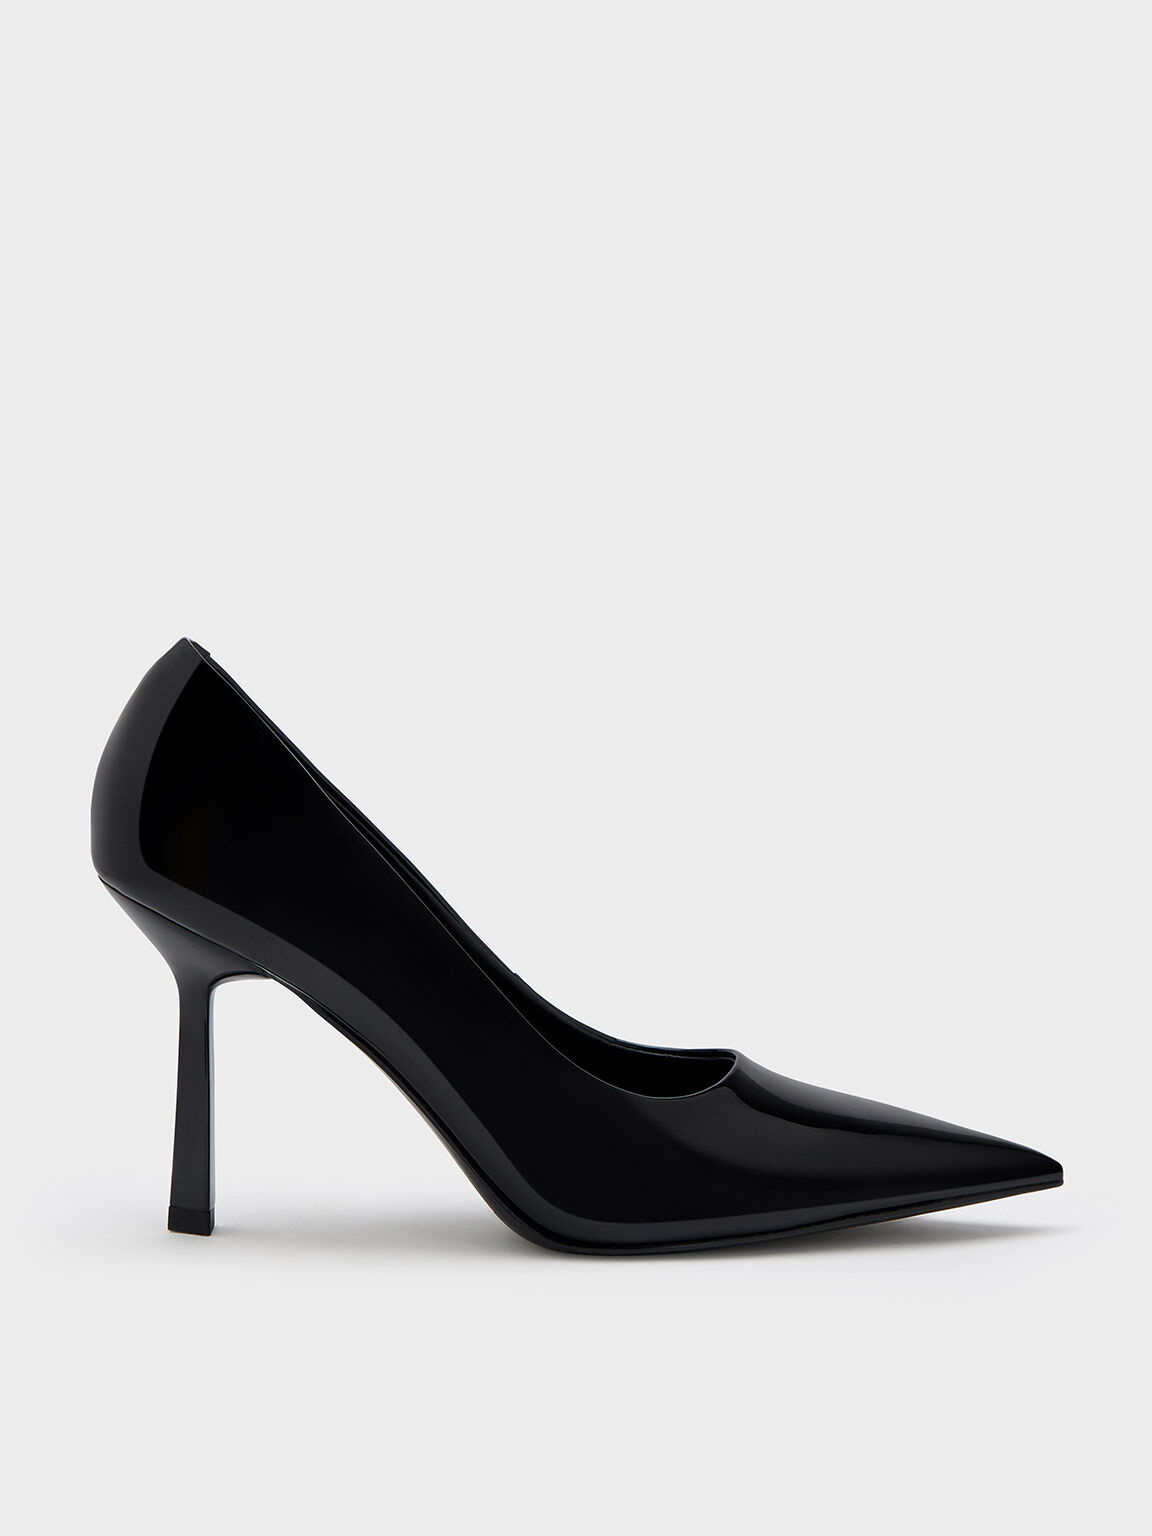 Black Patent Pointed-Toe Pumps - CHARLES & KEITH NL